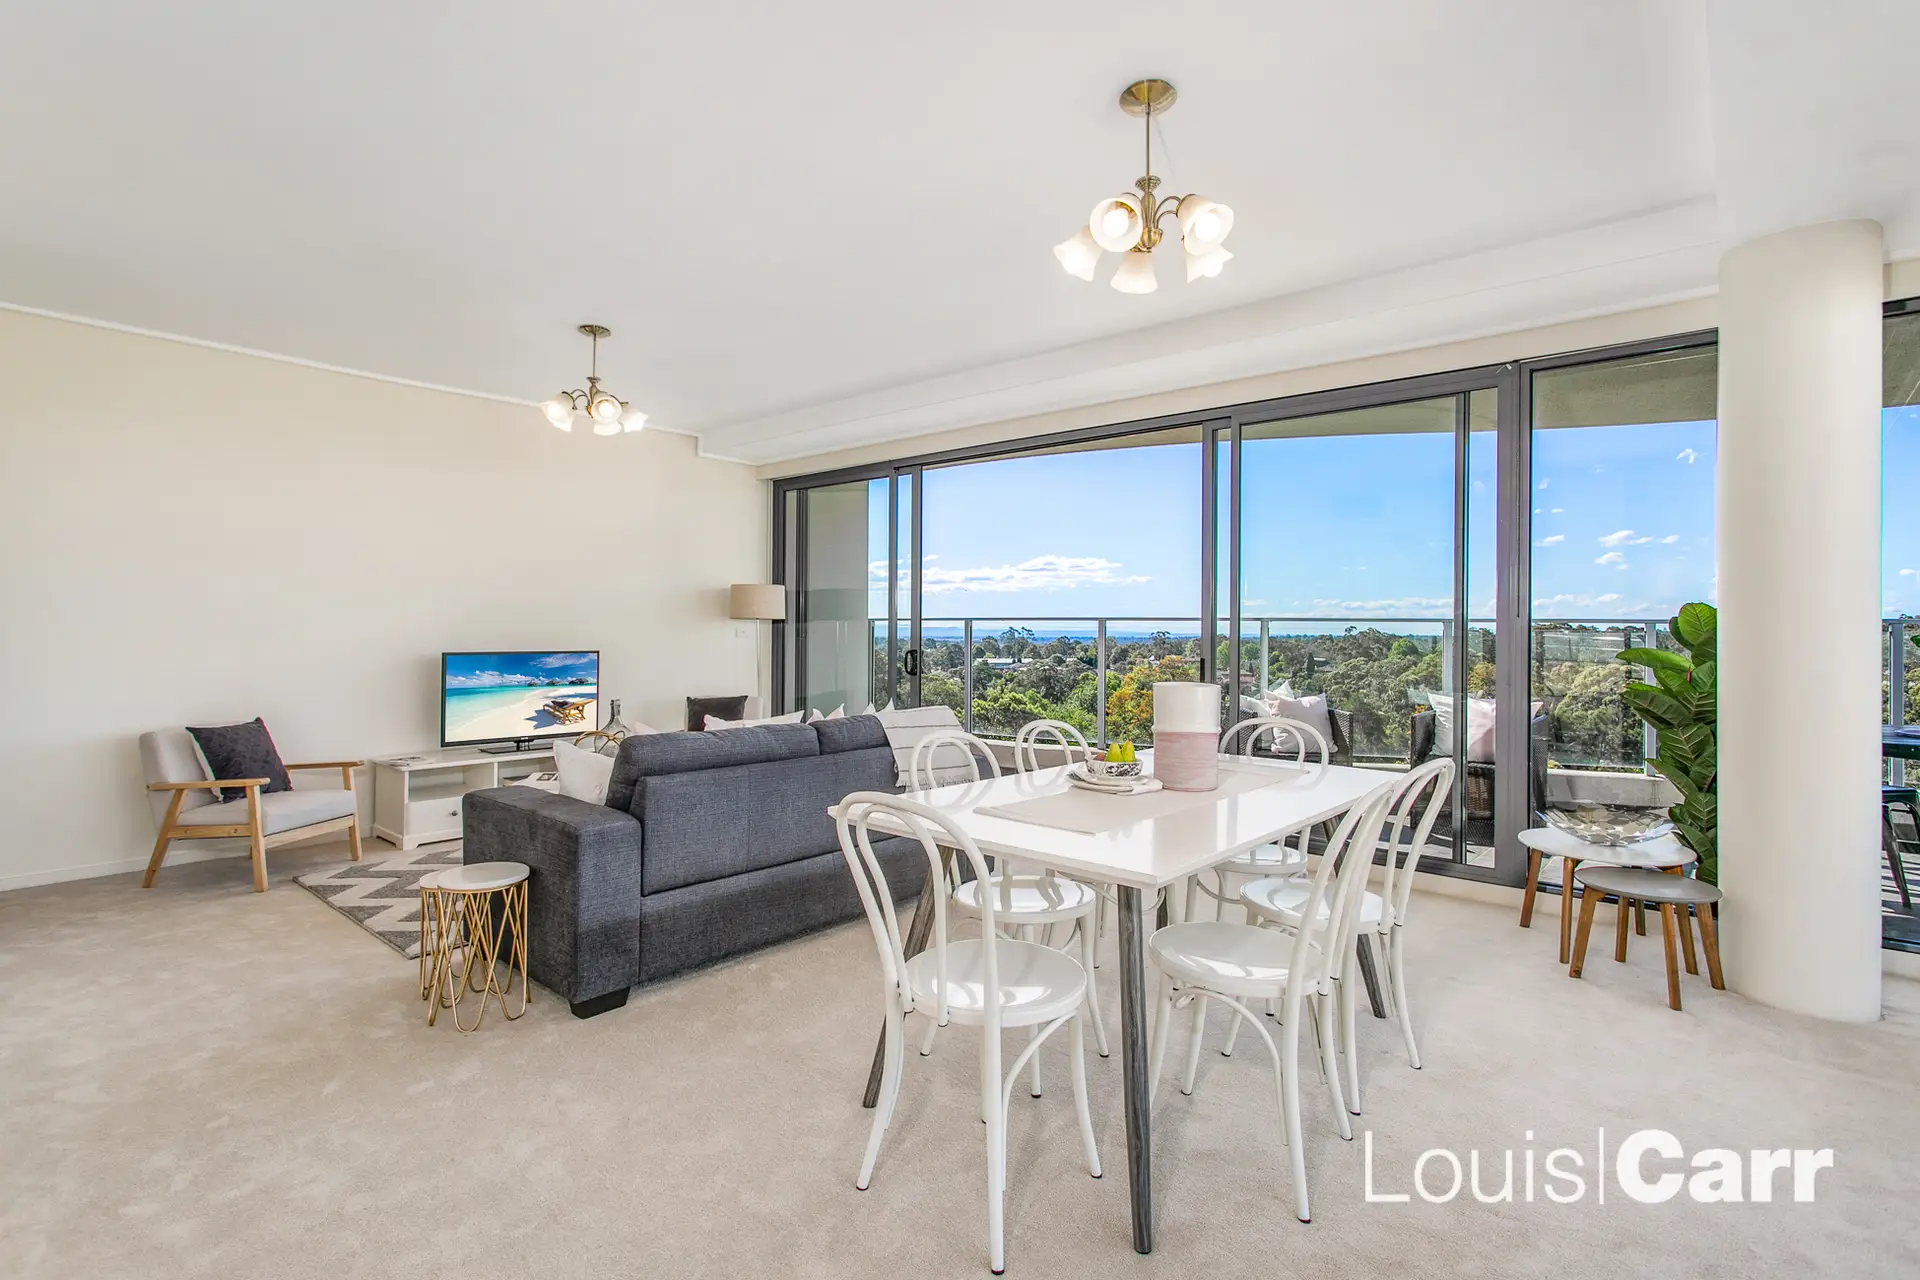 Photo #5: 707/12 Pennant Street, Castle Hill - Sold by Louis Carr Real Estate